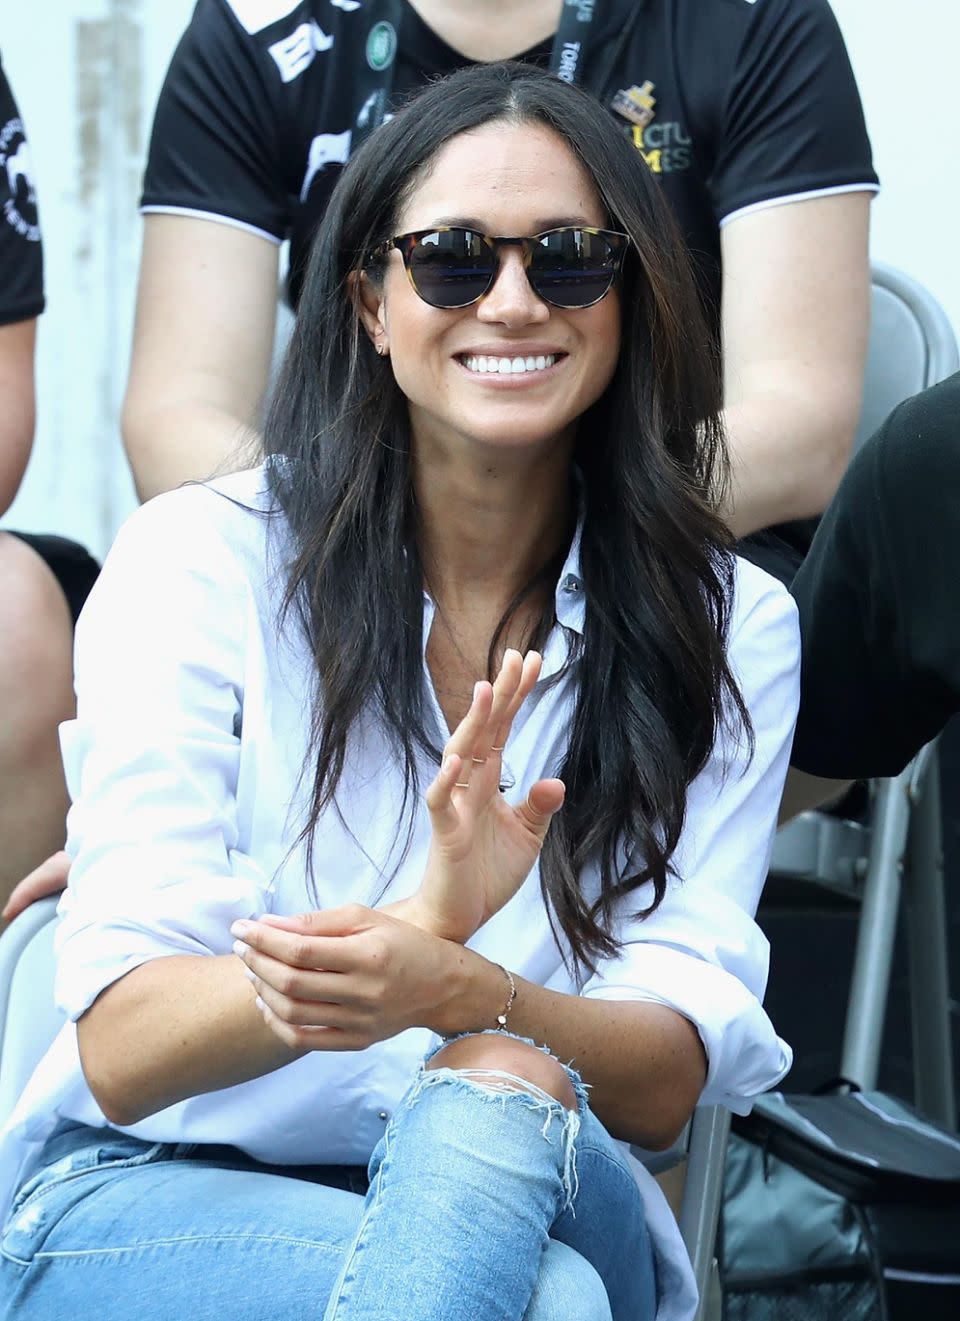 Be quick: Meghan's simple white shirt is still up for grabs. Photo: Getty